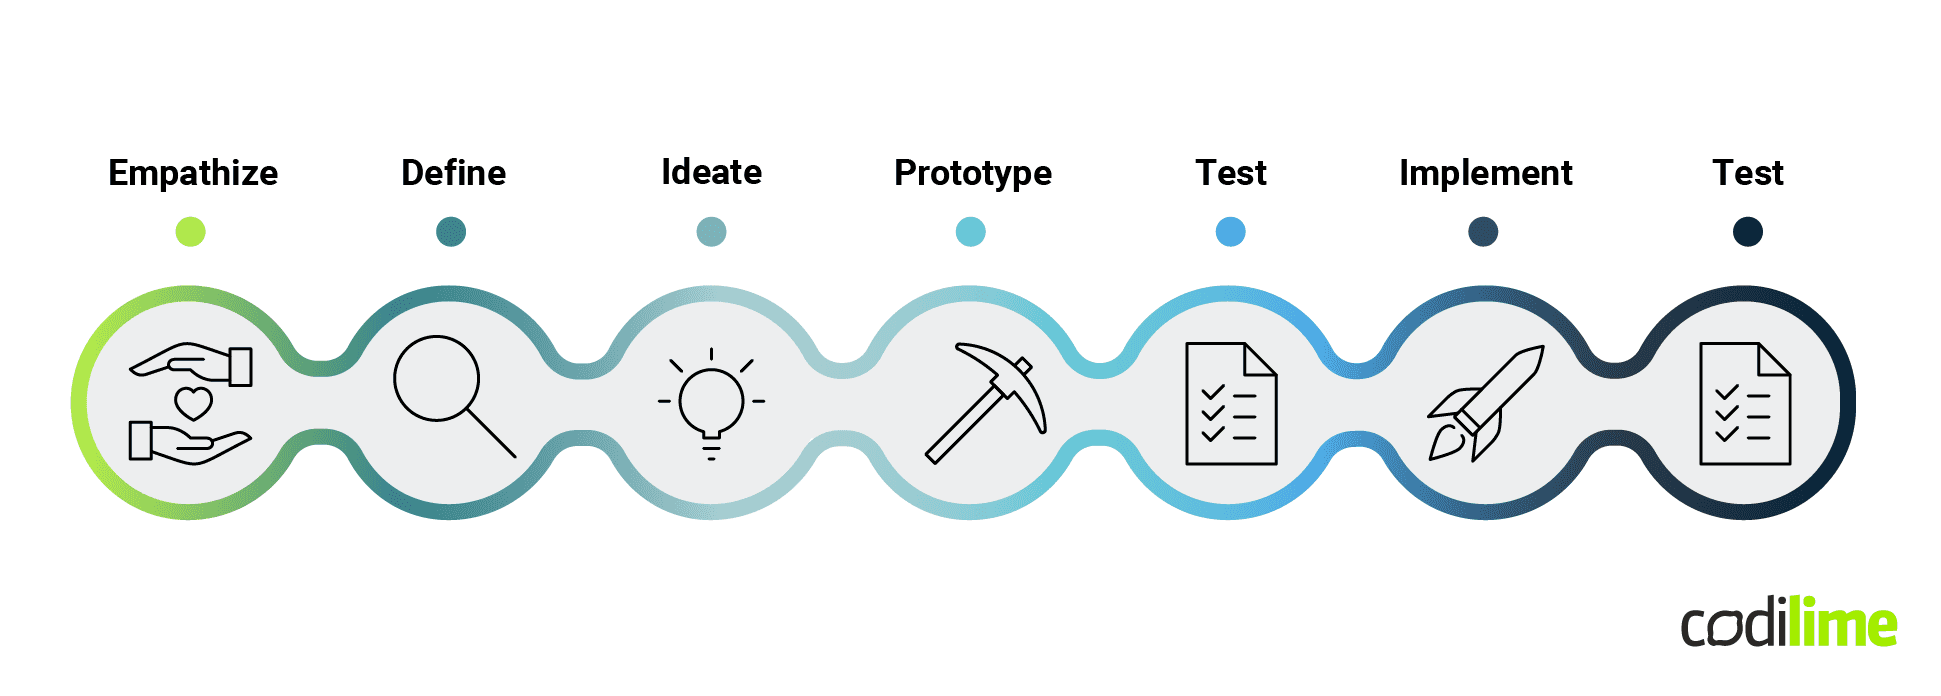 Stages of the design thinking process